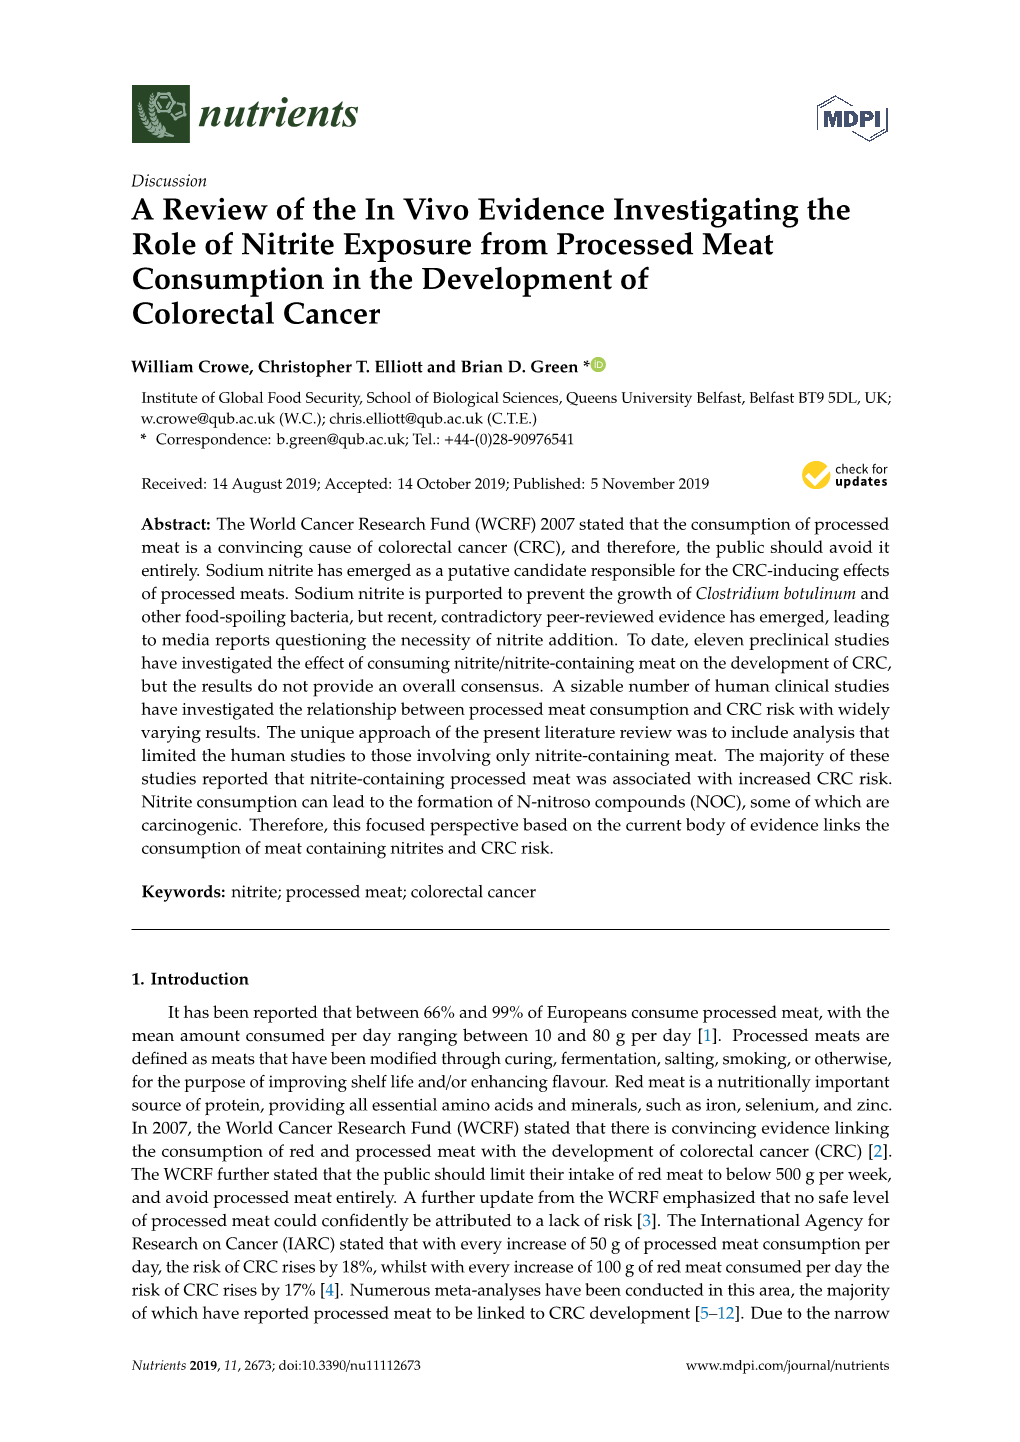 A Review of the in Vivo Evidence Investigating the Role of Nitrite Exposure from Processed Meat Consumption in the Development of Colorectal Cancer